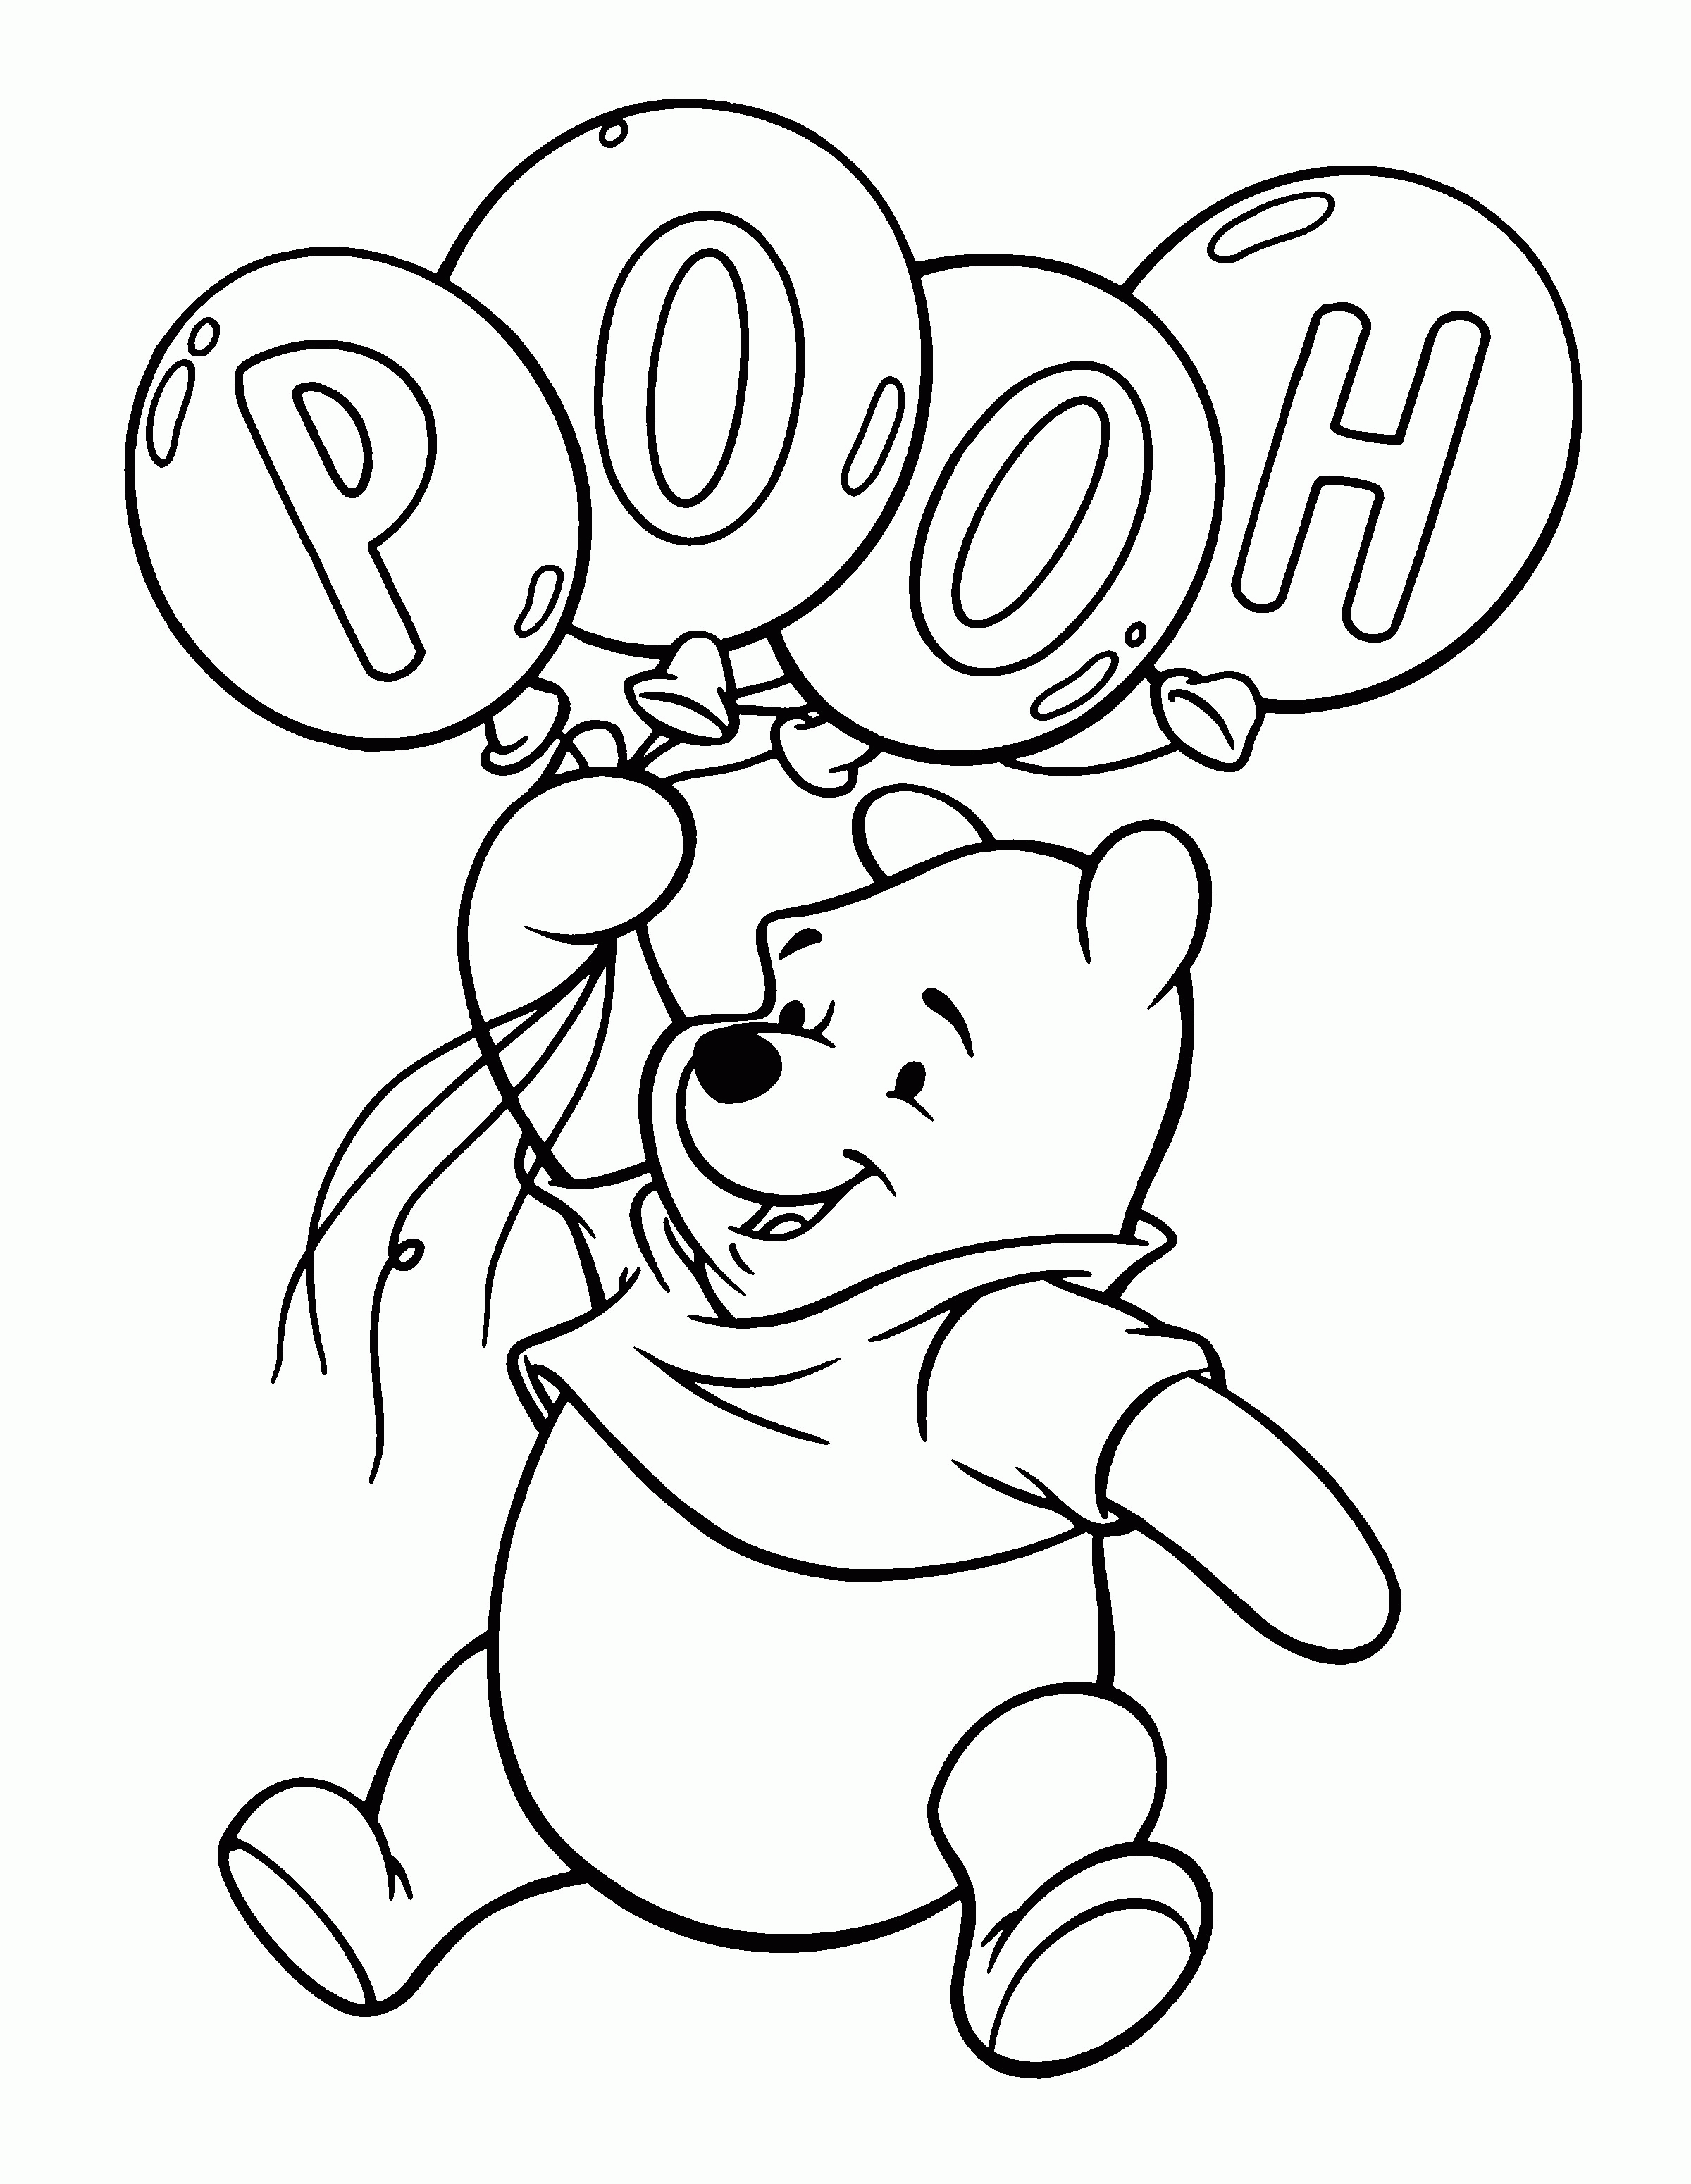 Classic Winnie Pooh Coloring Pages 100 Images Home